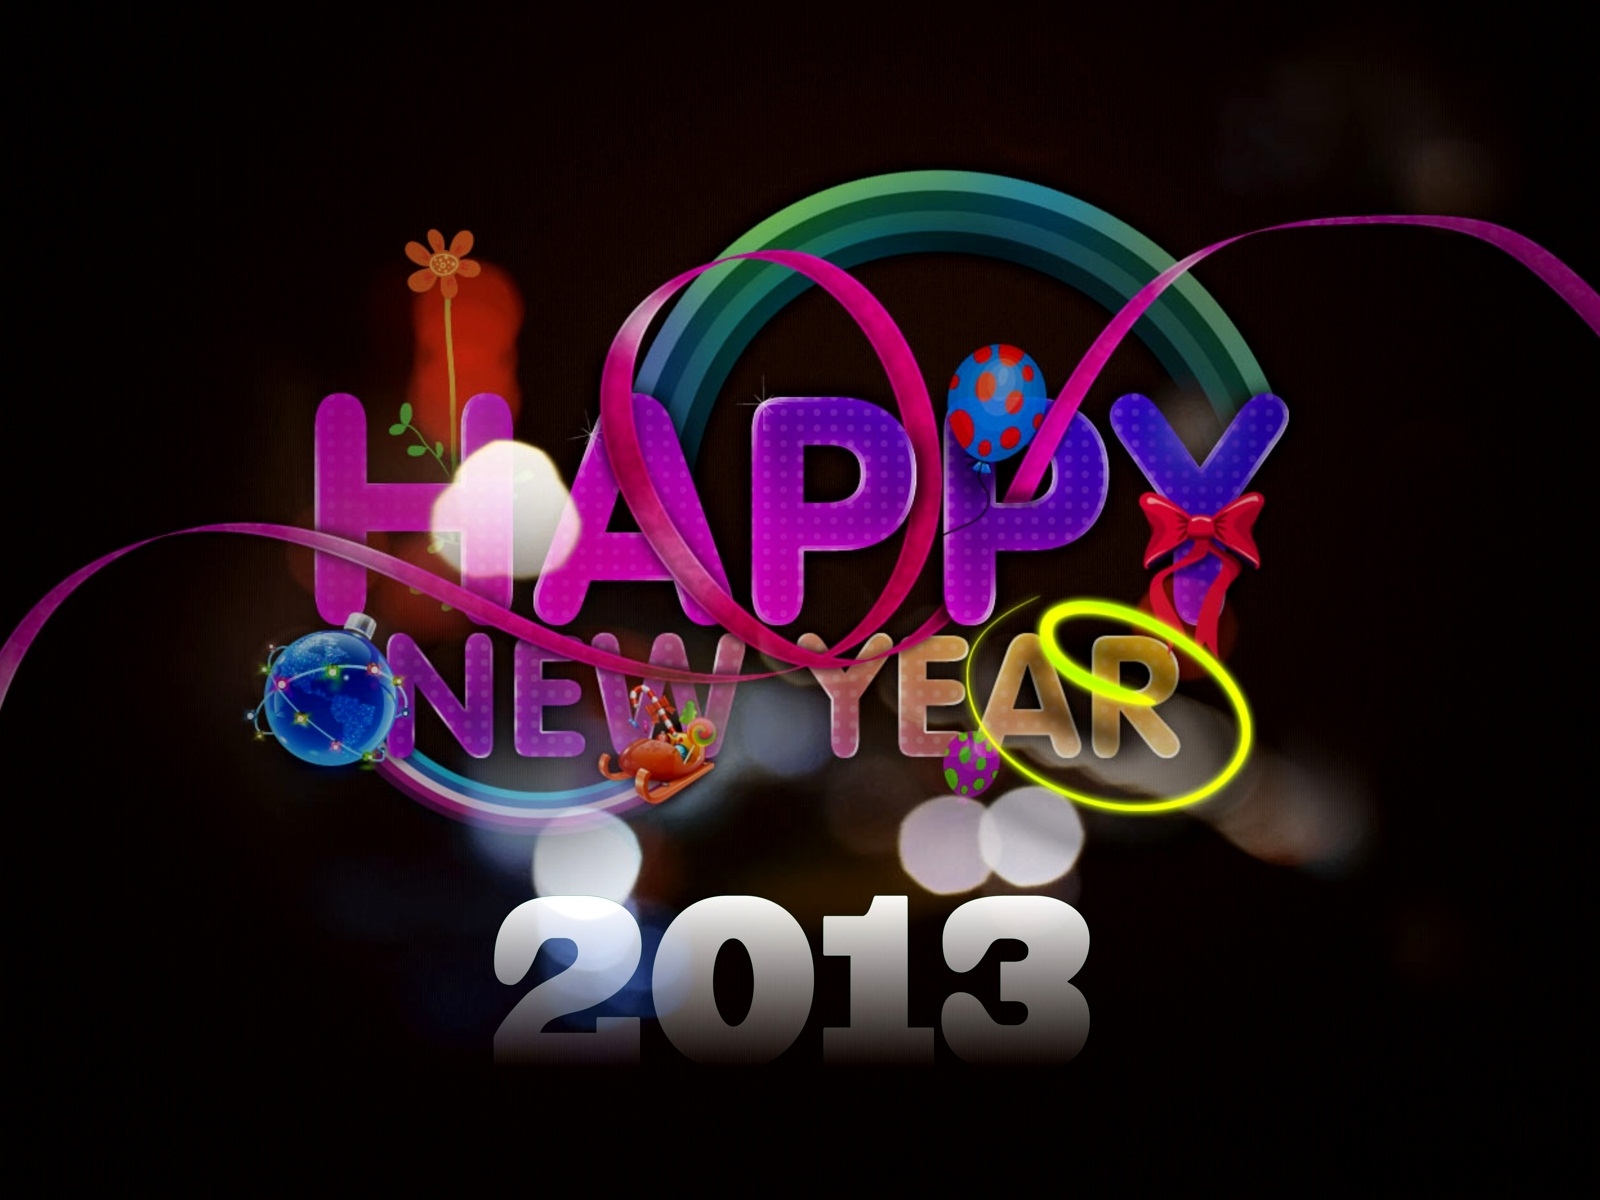 And Happy New Year Wallpaper HD Background